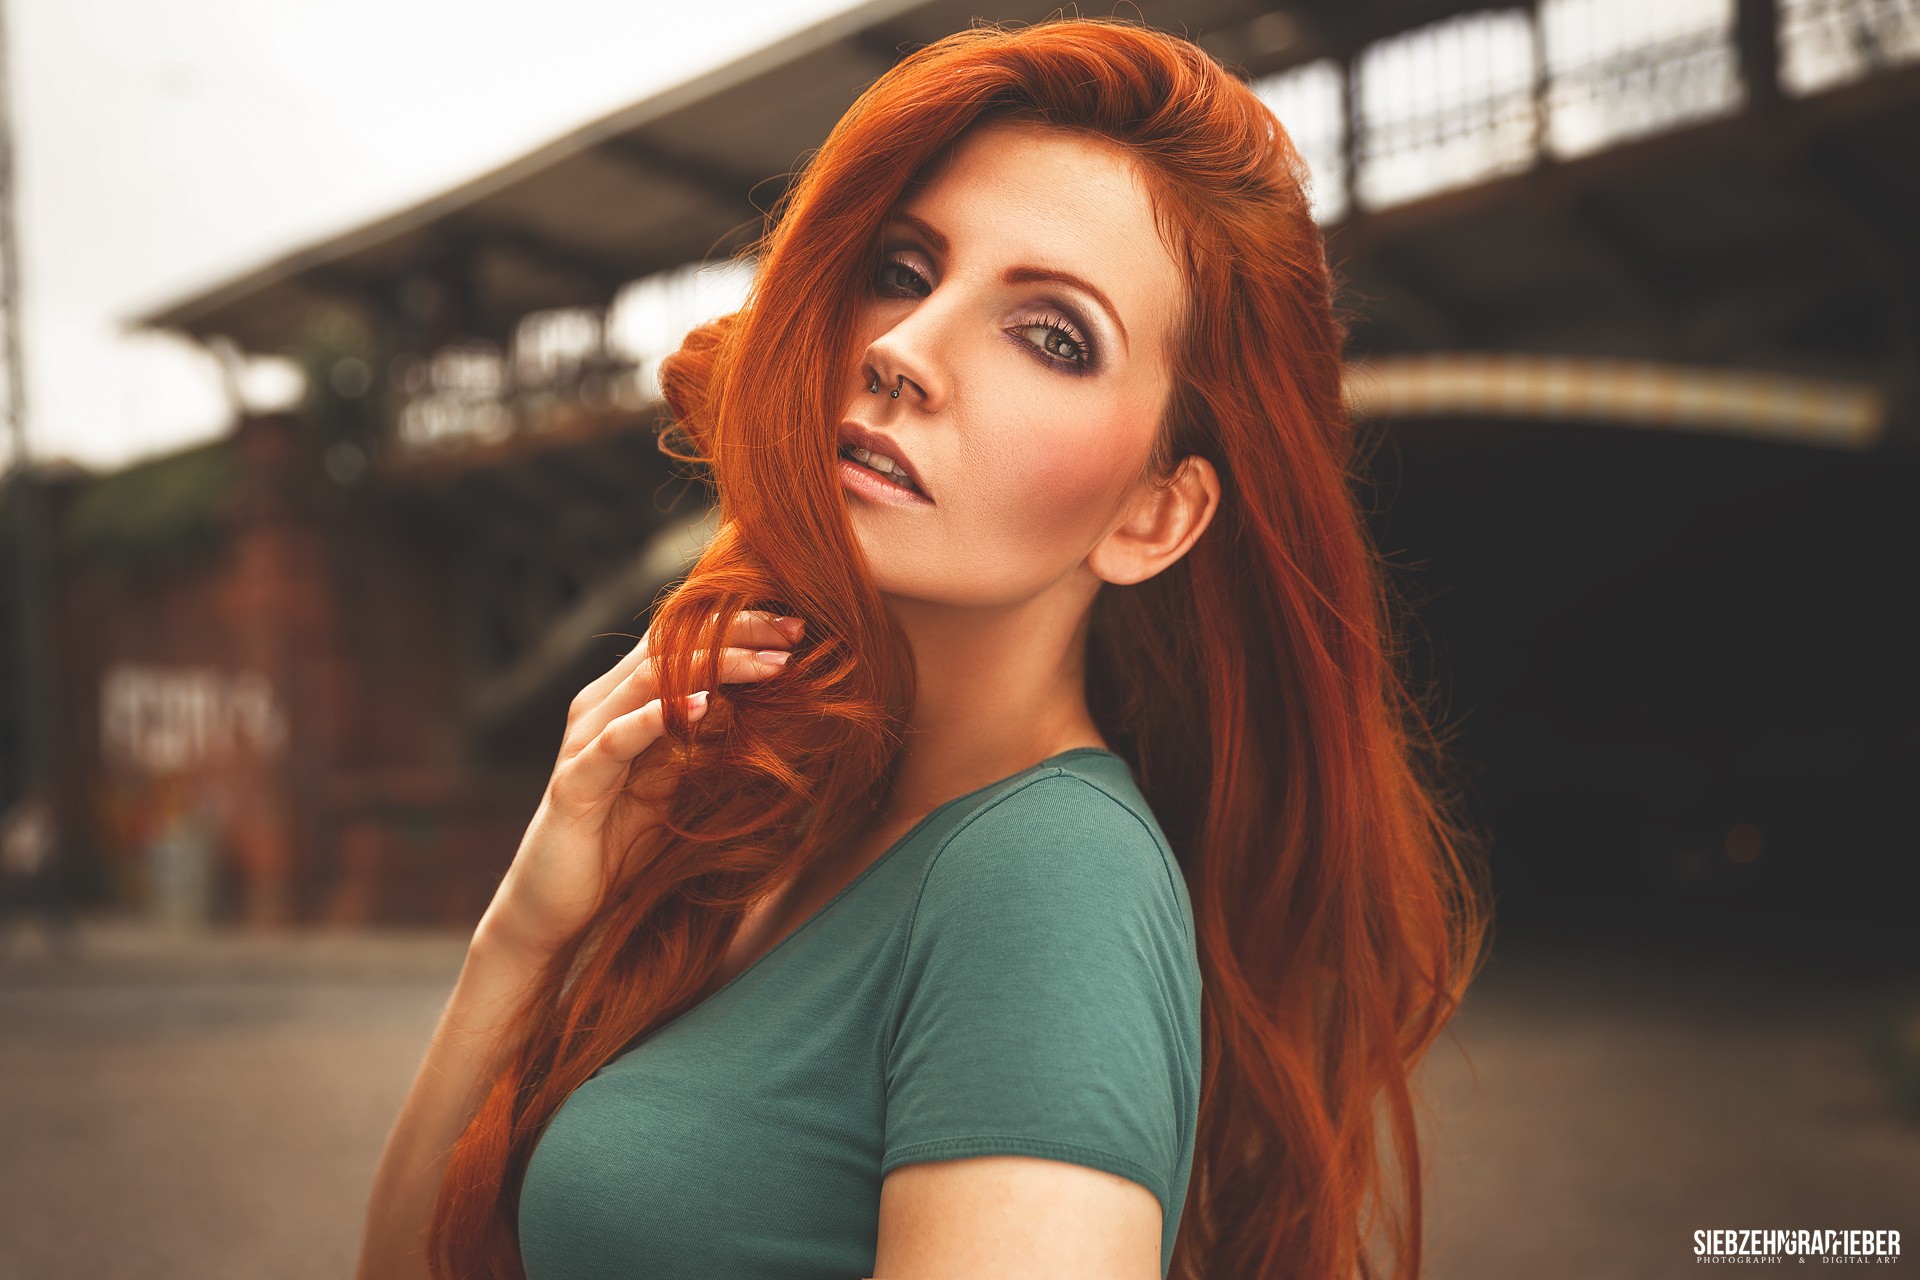 People 1920x1280 women redhead green eyes pierced nose smoky eyes portrait face hair in face Siebzehn Grad Fieber piercing nose ring long hair women outdoors urban model watermarked looking at viewer makeup parted lips